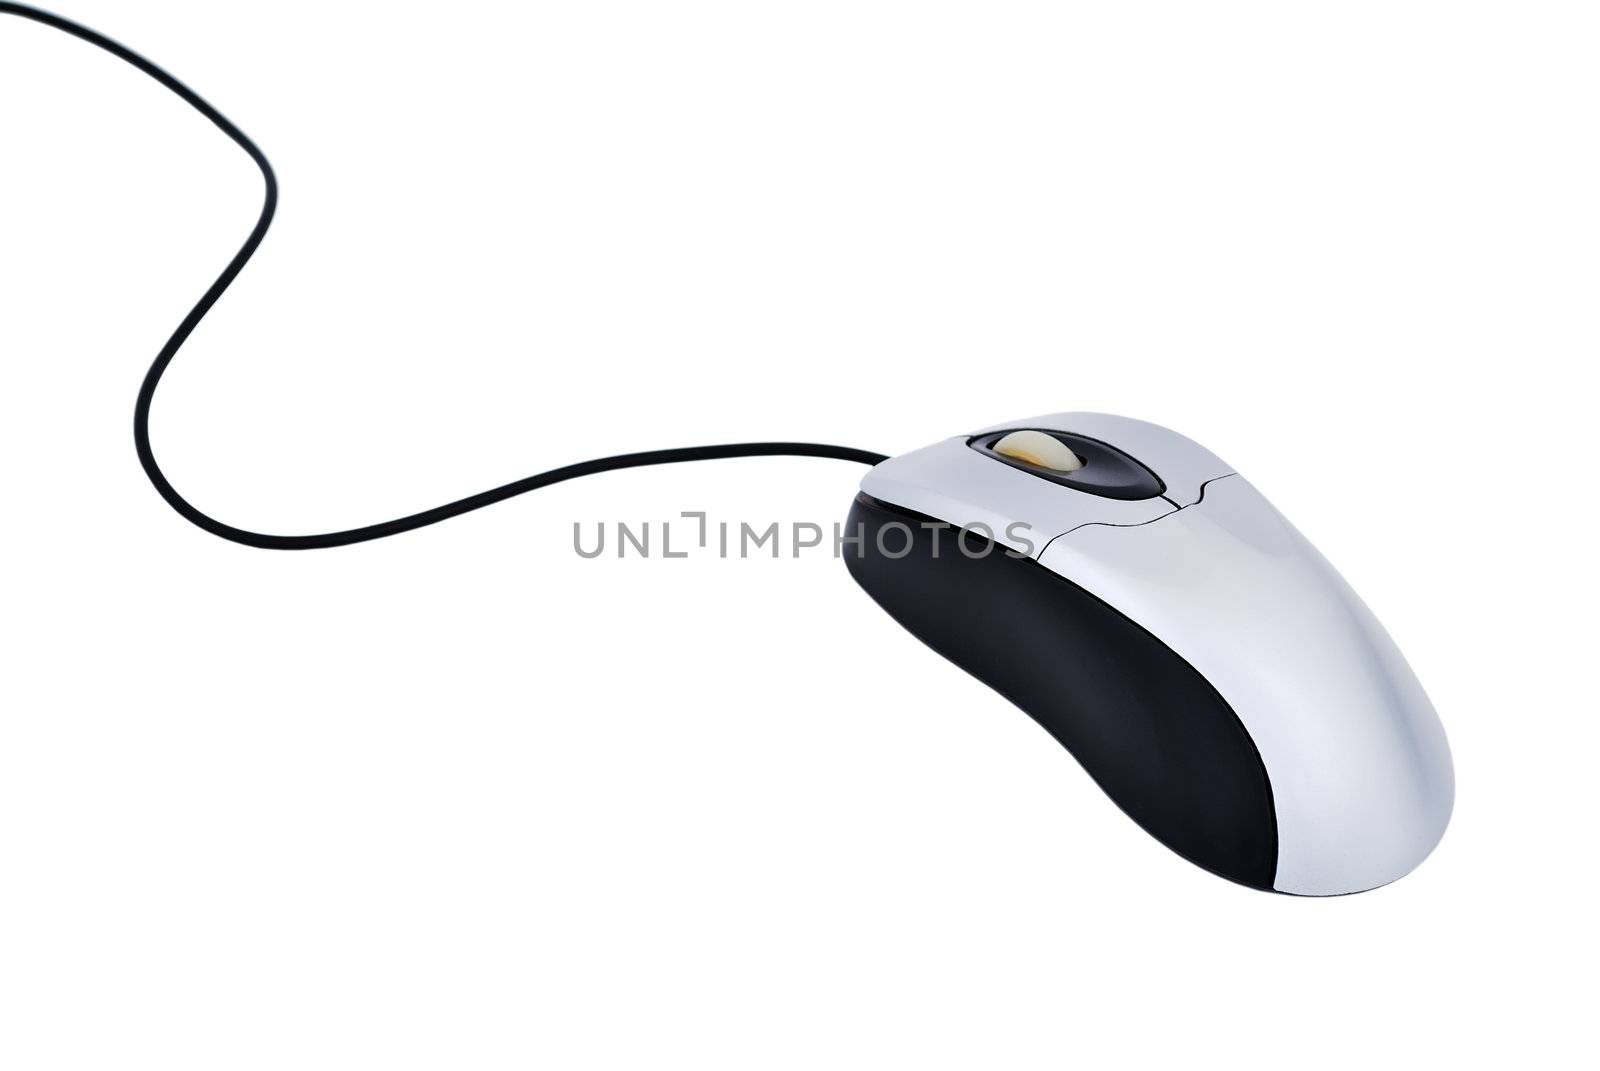 computer mouse on white background